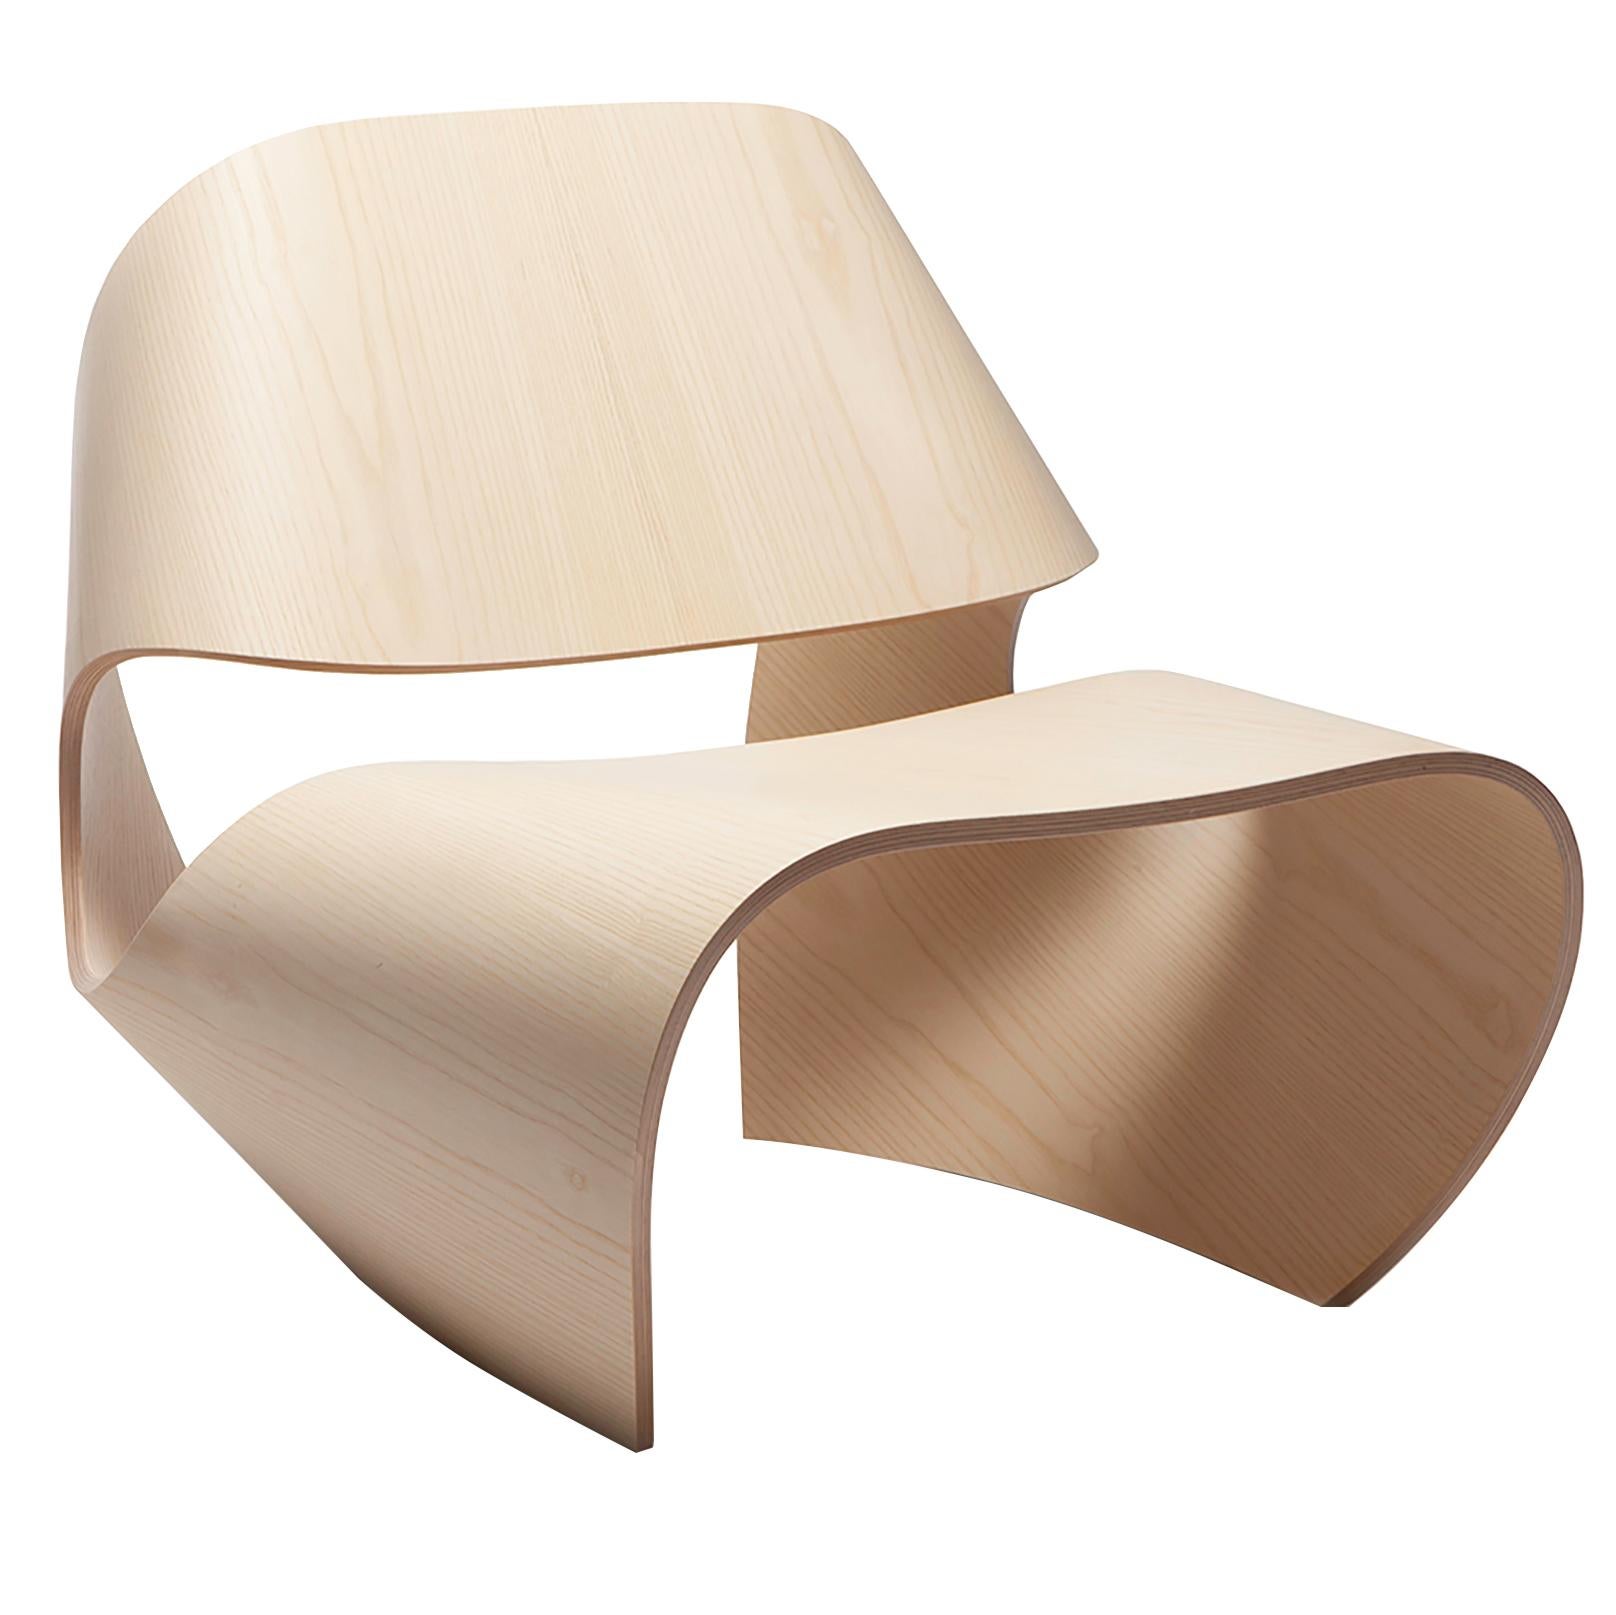 Cowrie, Ash Veneered Bent Plywood Lounge Chair by Made in Ratio